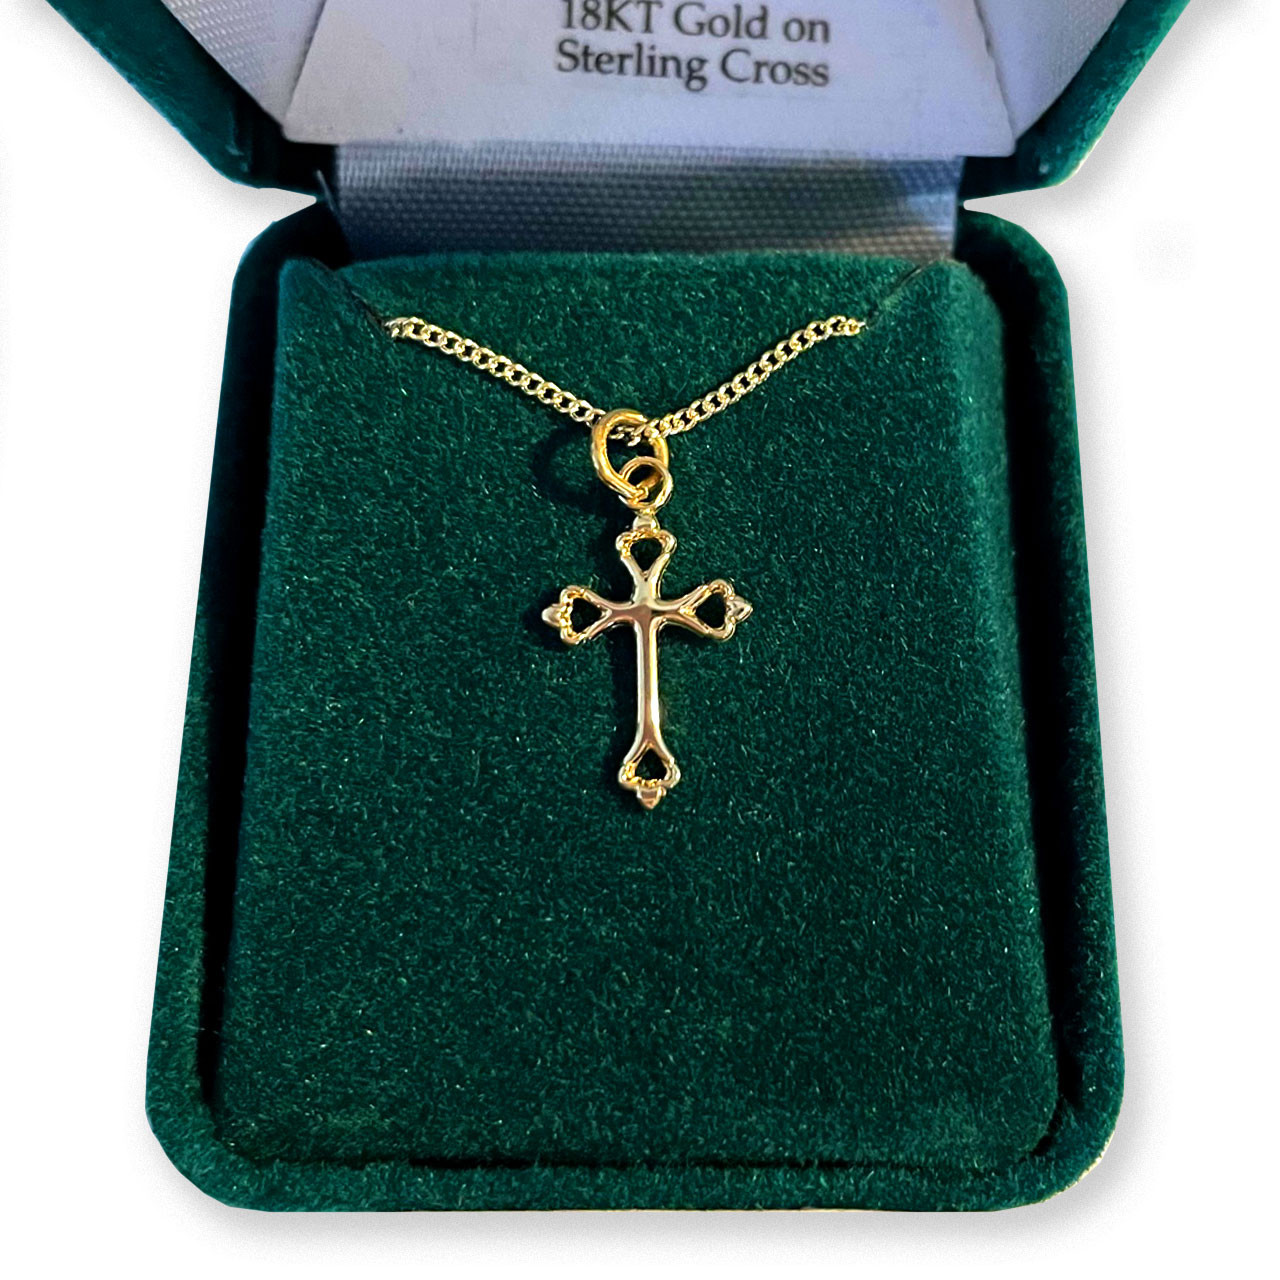 18kt Gold Open Budded Cross Necklace in Gift Box